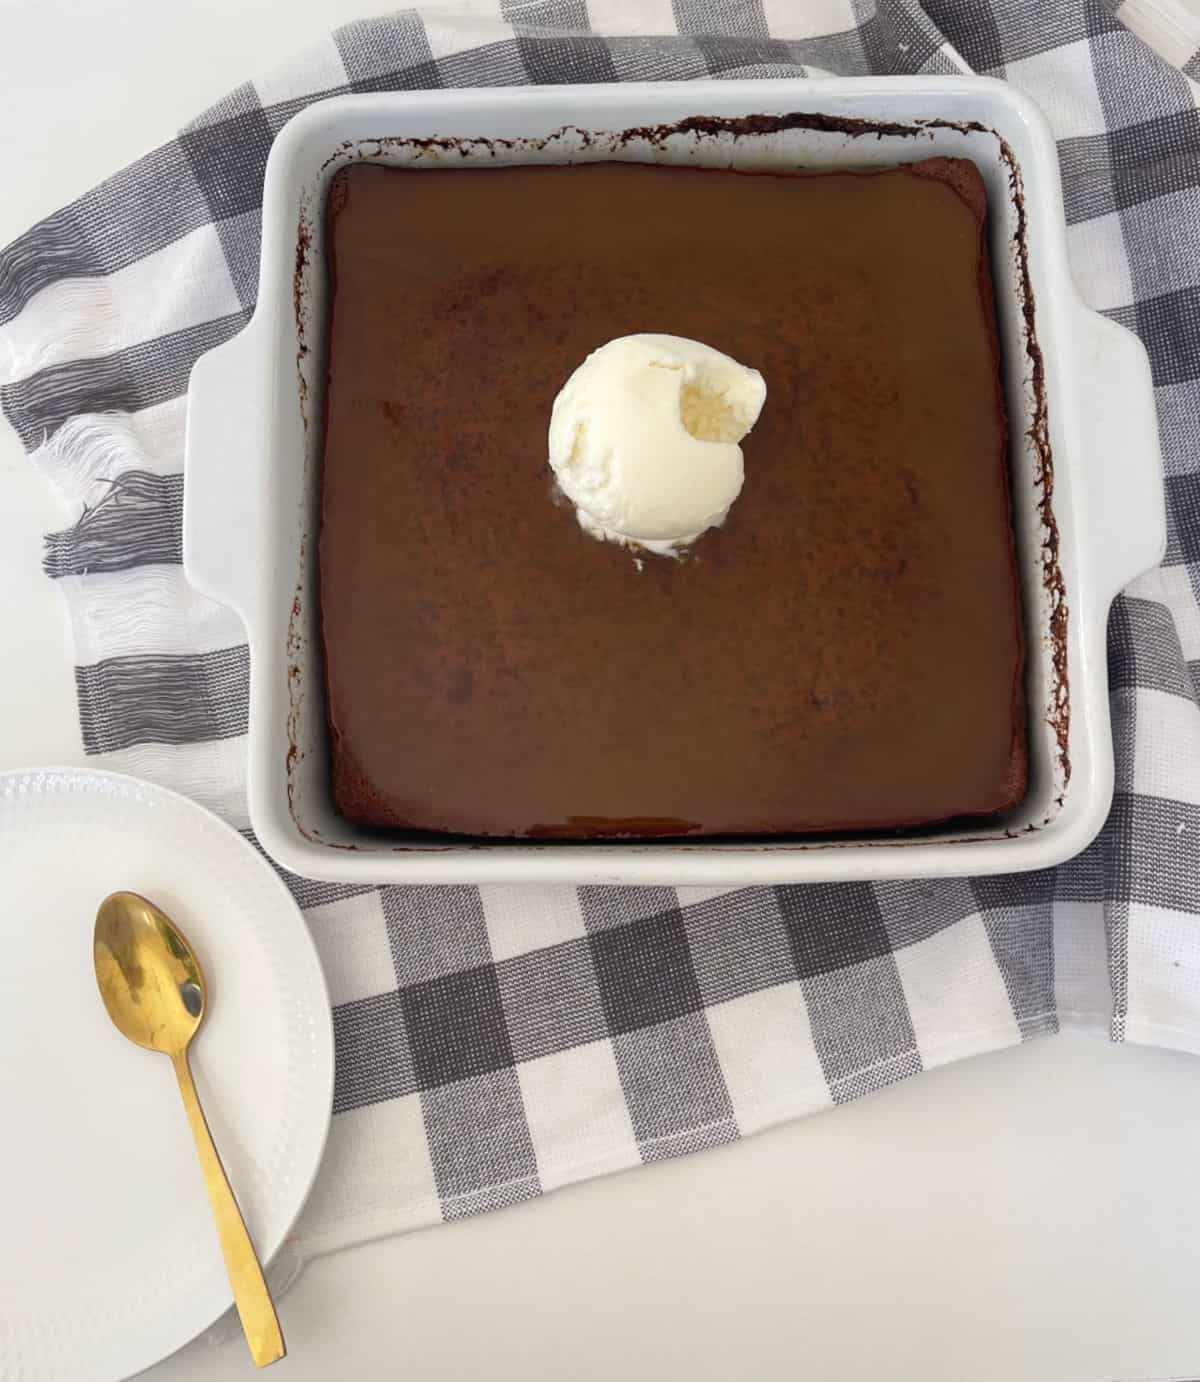 Overhead view of Sticky date pudding in a white square baking dish. A white plate and gold spoon is next to it.